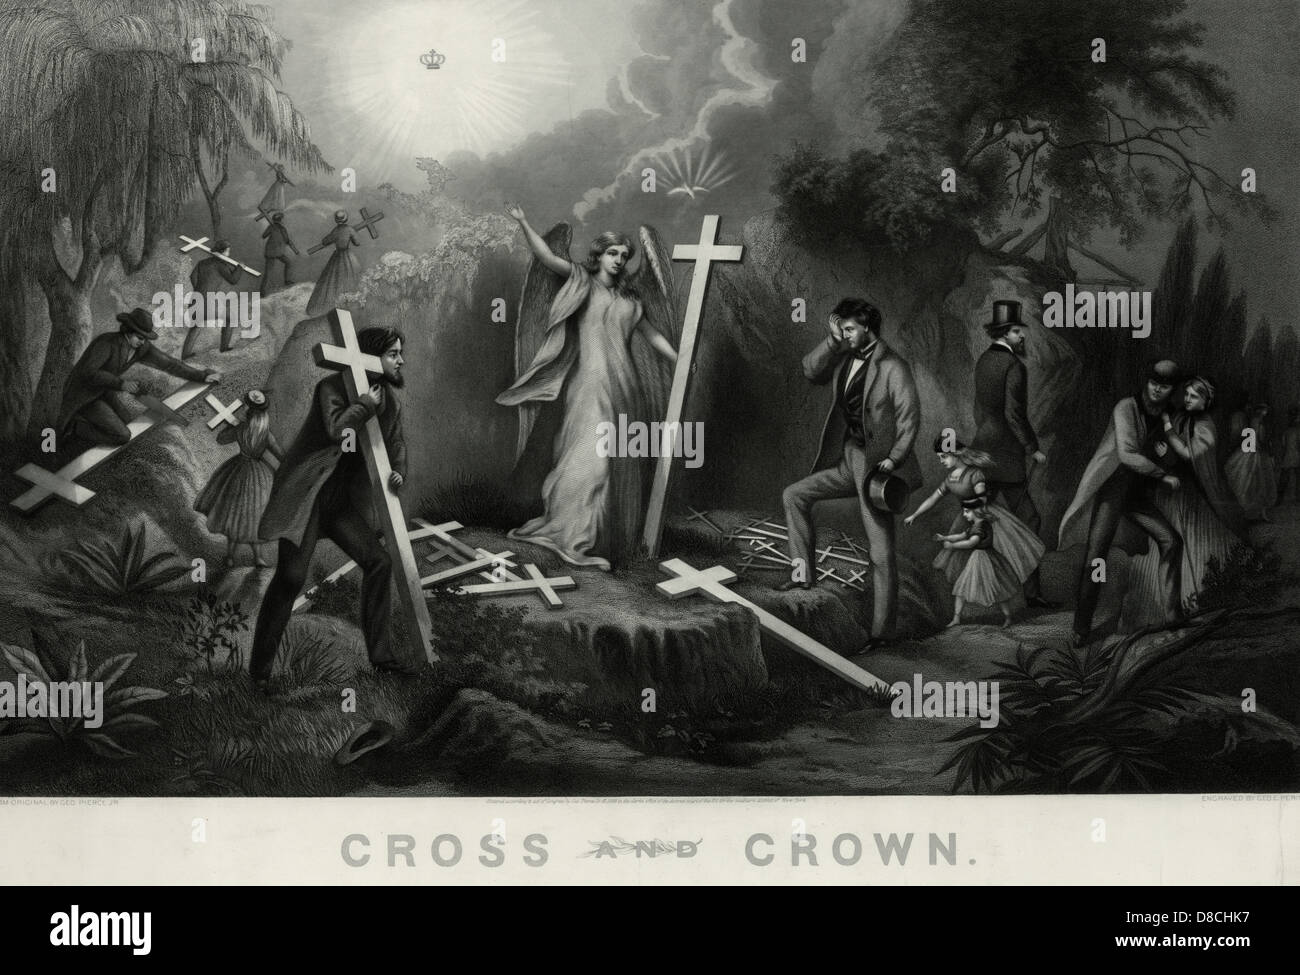 Cross and crown - an angel handing crosses to people to carry. Stock Photo